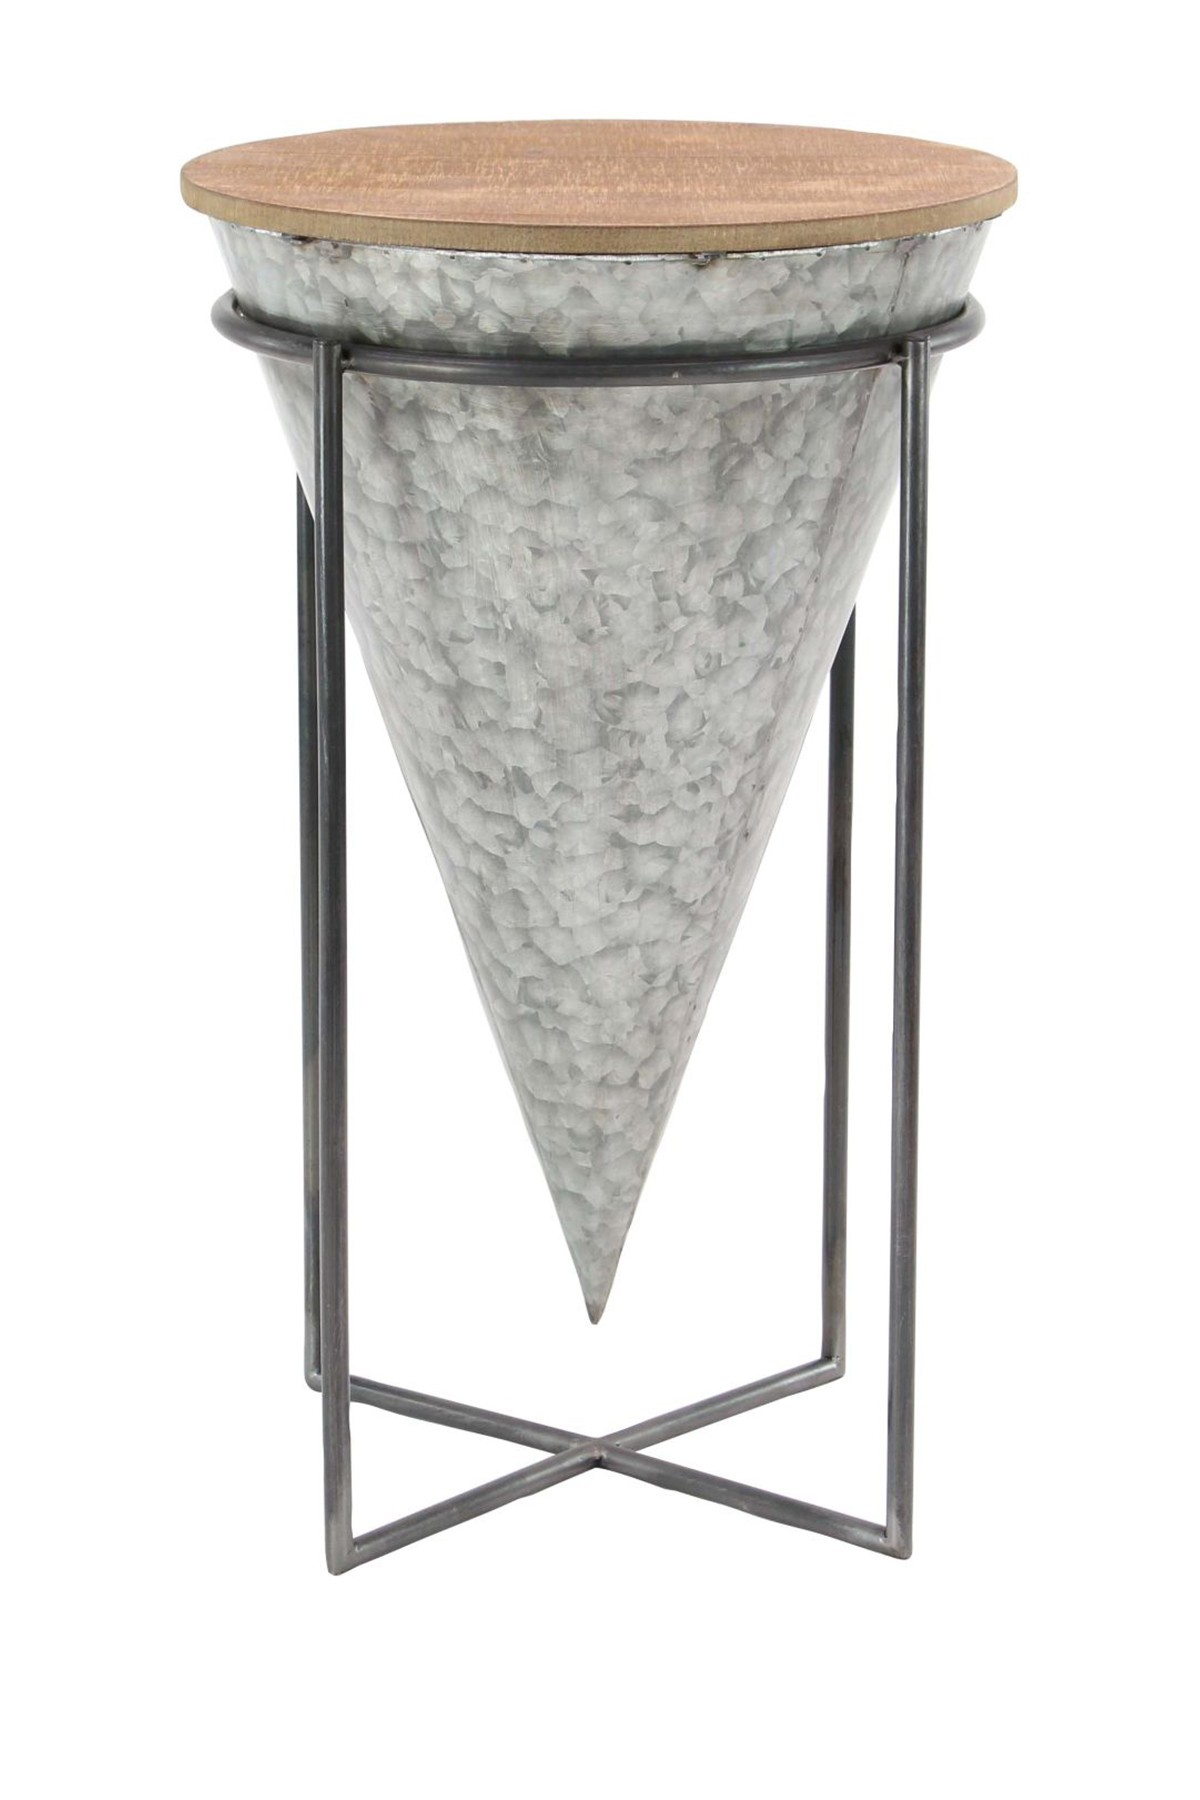 gray brown metal wood accent table products accents white bedside cabinets folding chair long nightstand perspex occasional tables round with screw legs black bedroom tall modern